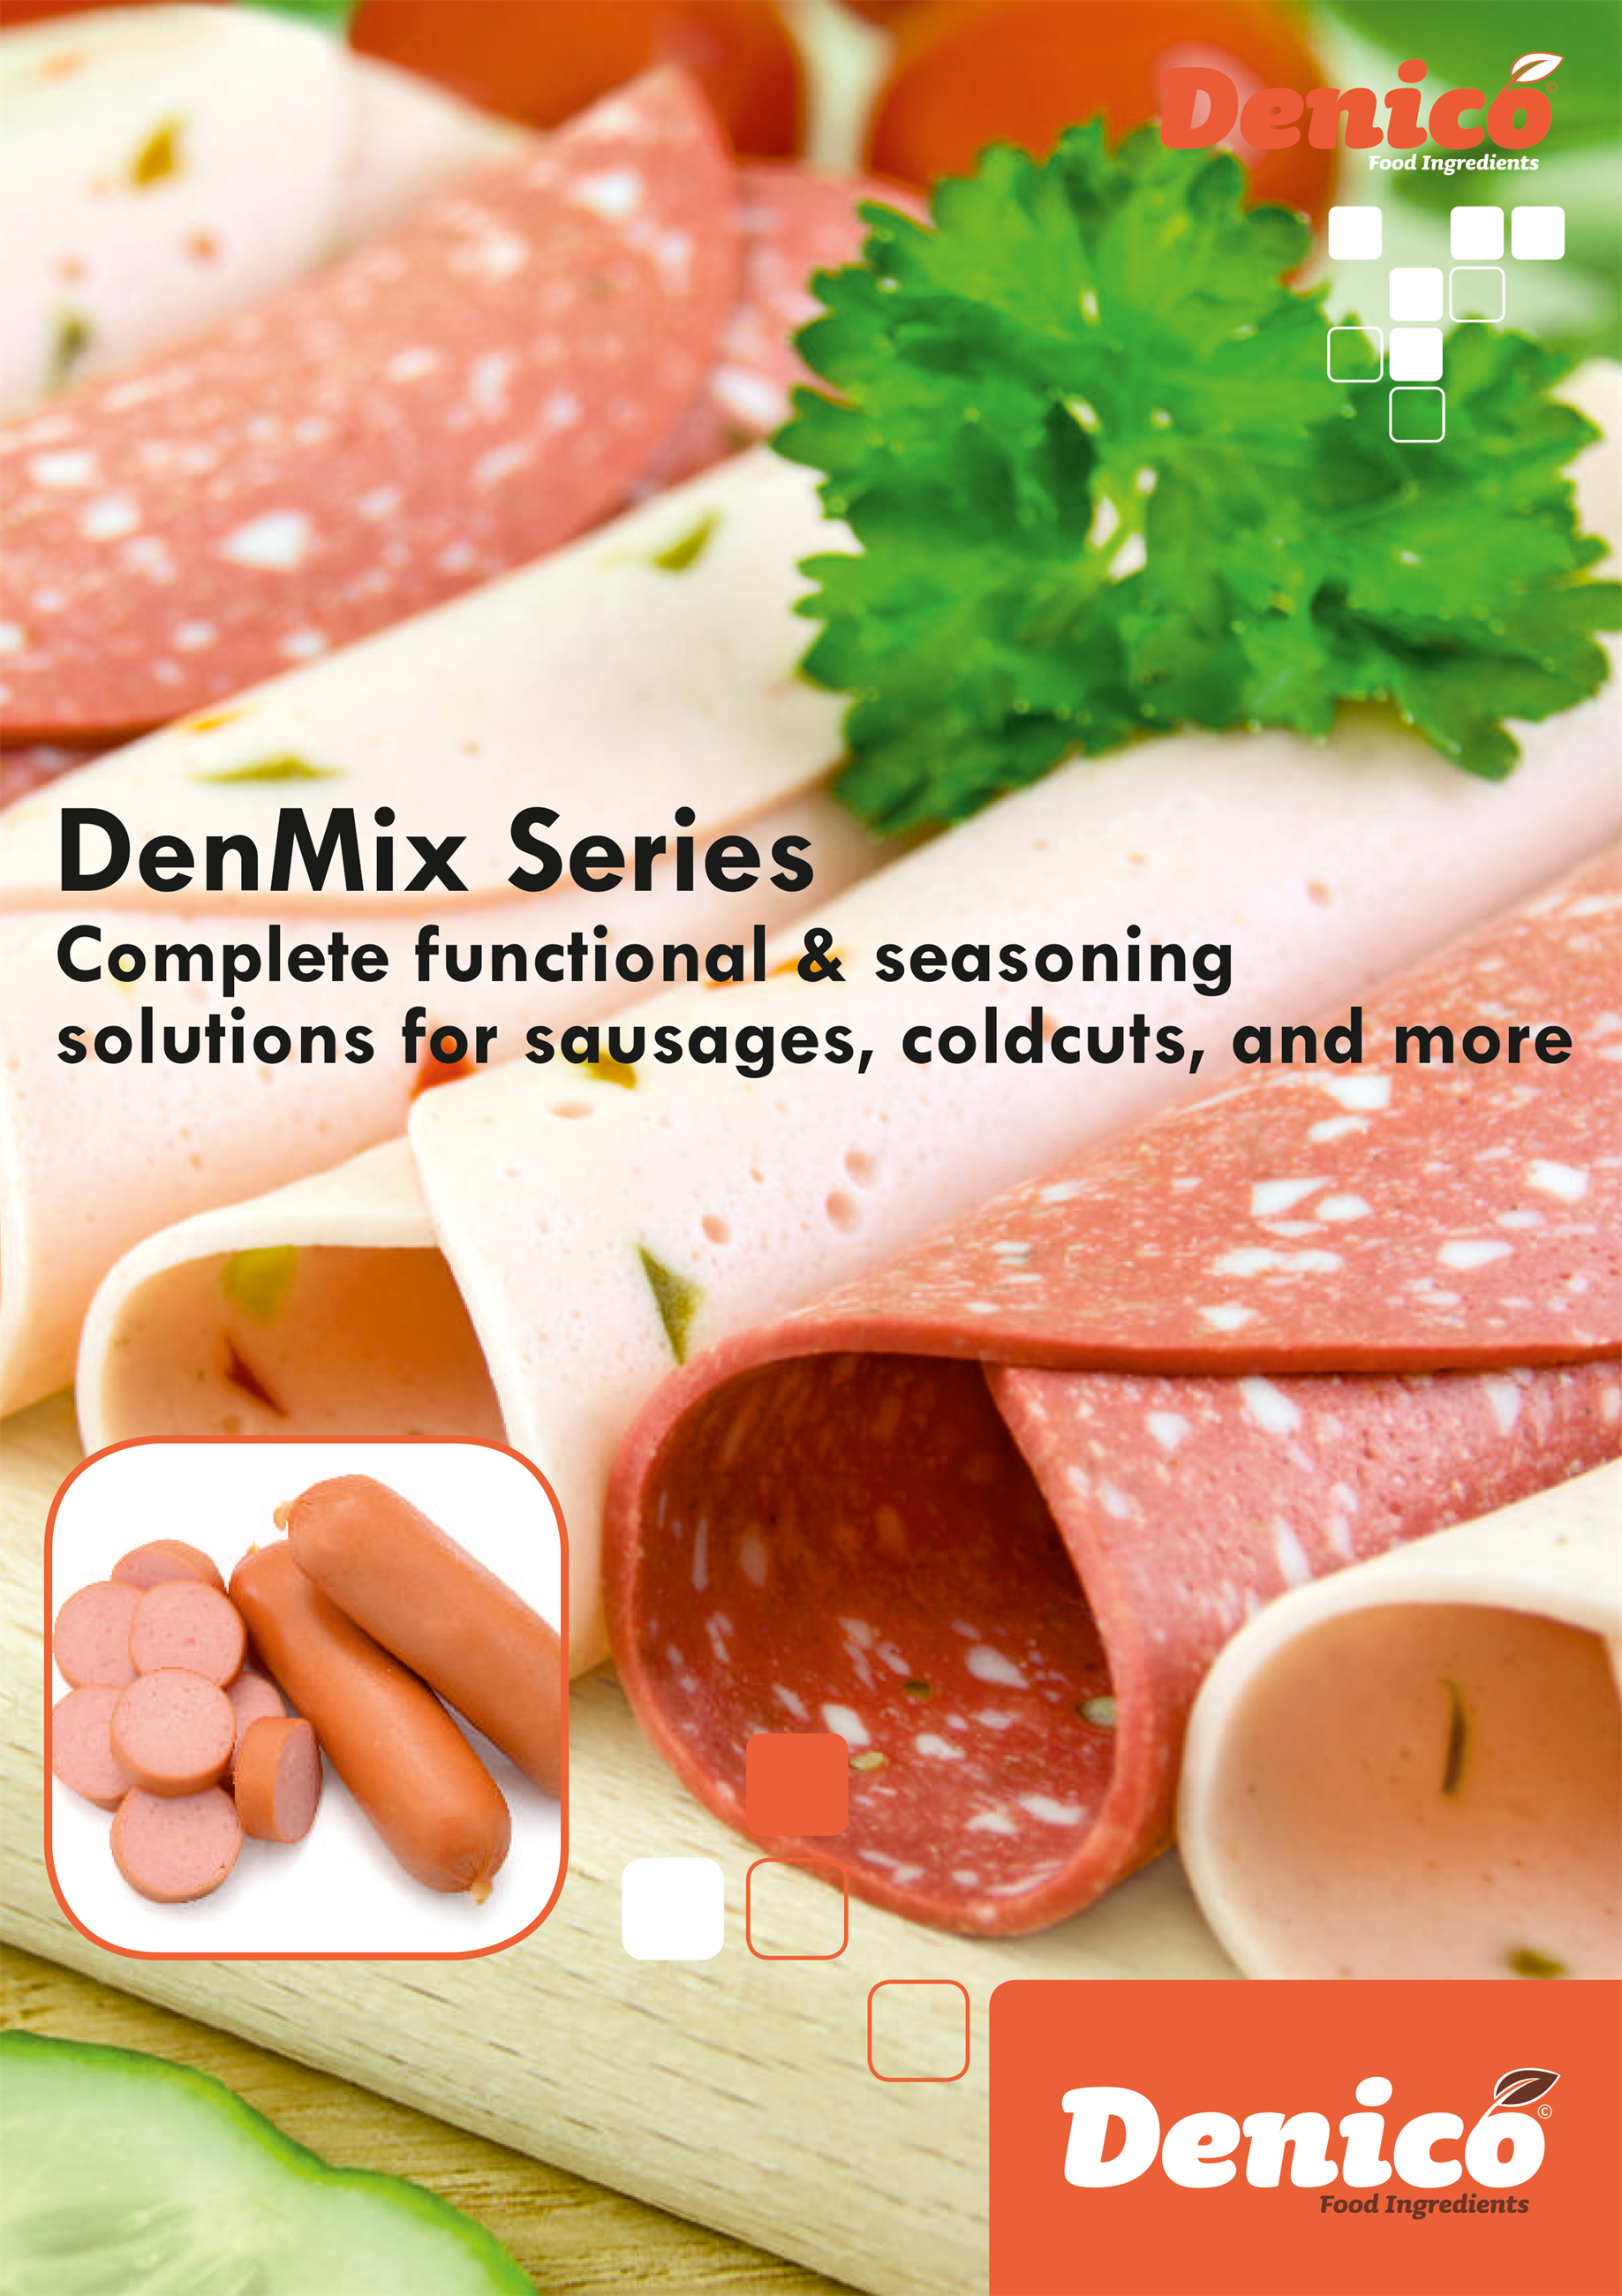 denmix-series---complete-functiona&seasoning-solutions-1